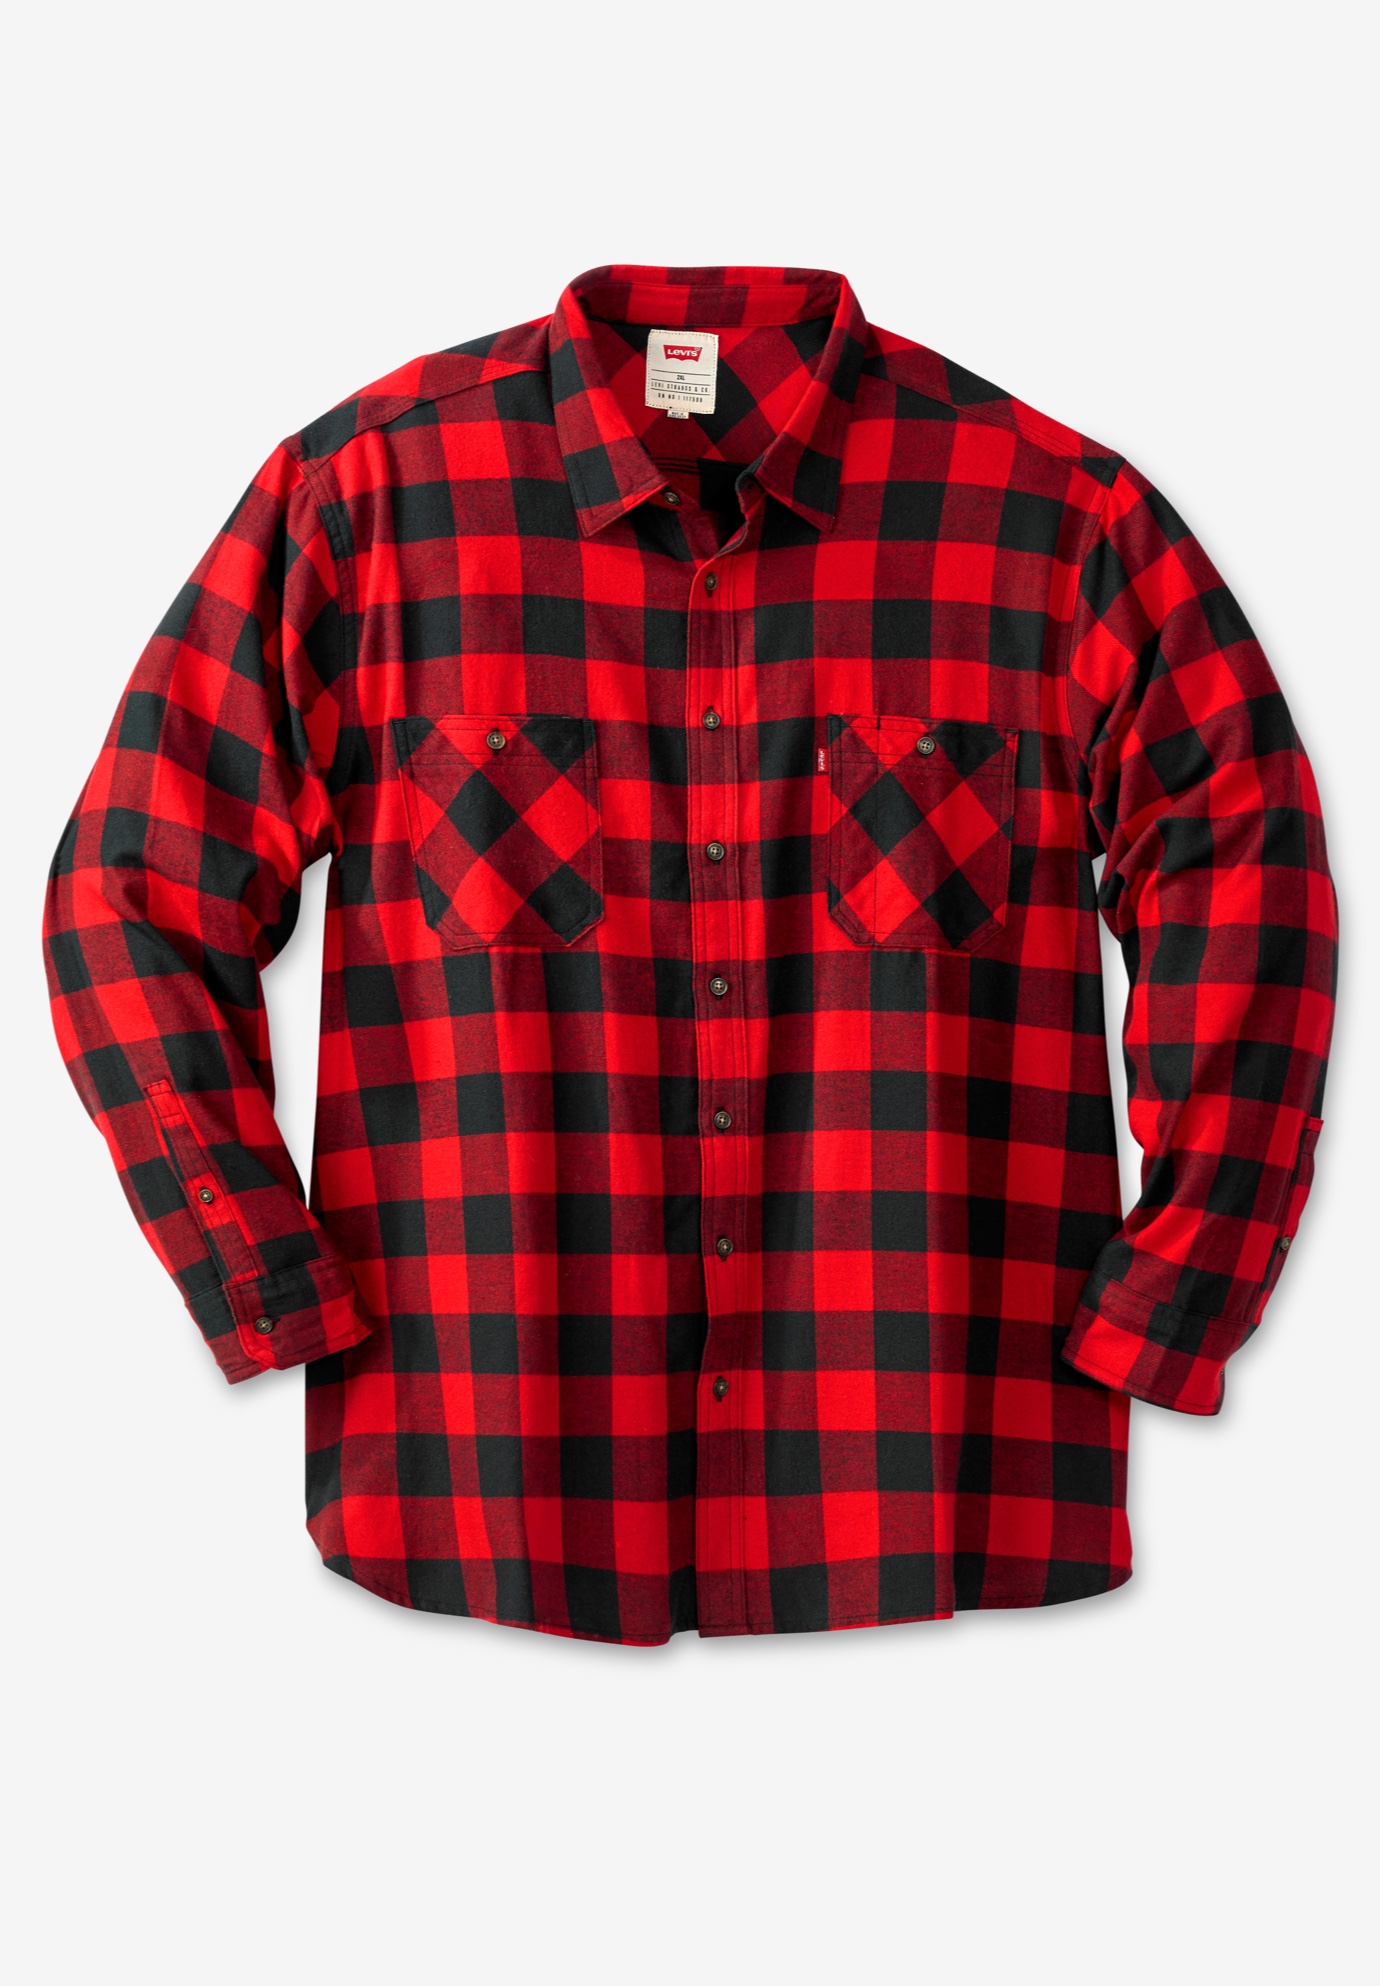 flannel levis